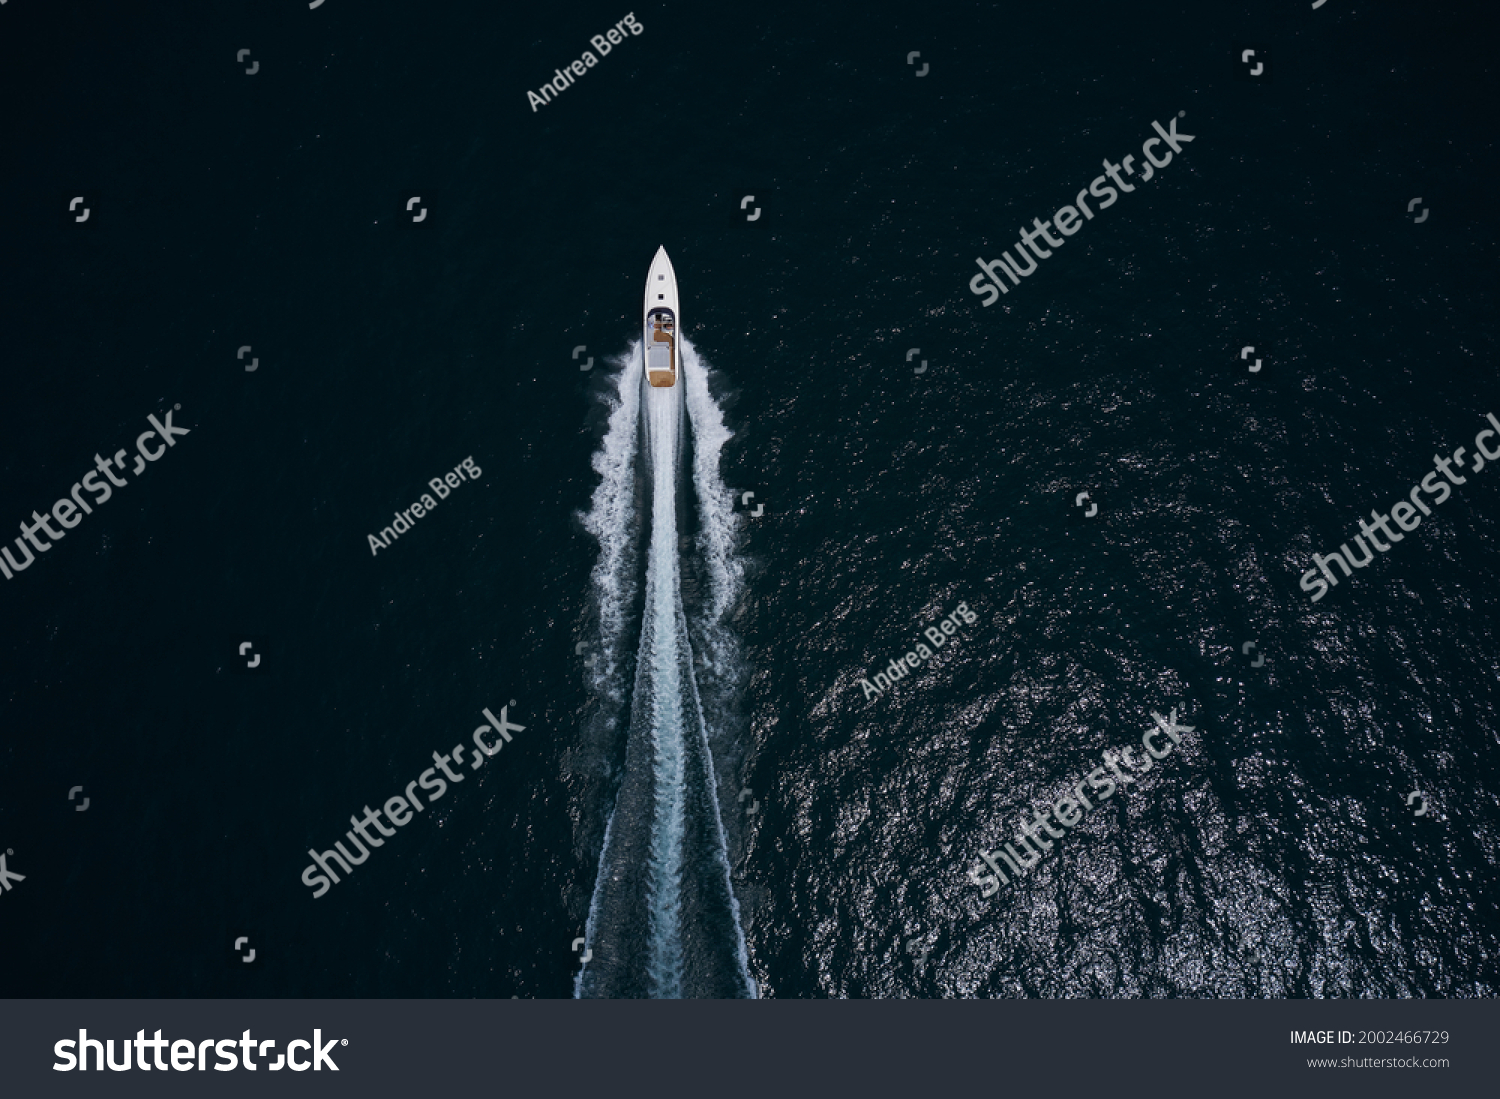 Speedboat movement on the water.Speedboat wave speed water. Large white boat driving on dark water. Speedboat on dark blue water aerial view. Speed boat faster movement top view. #2002466729